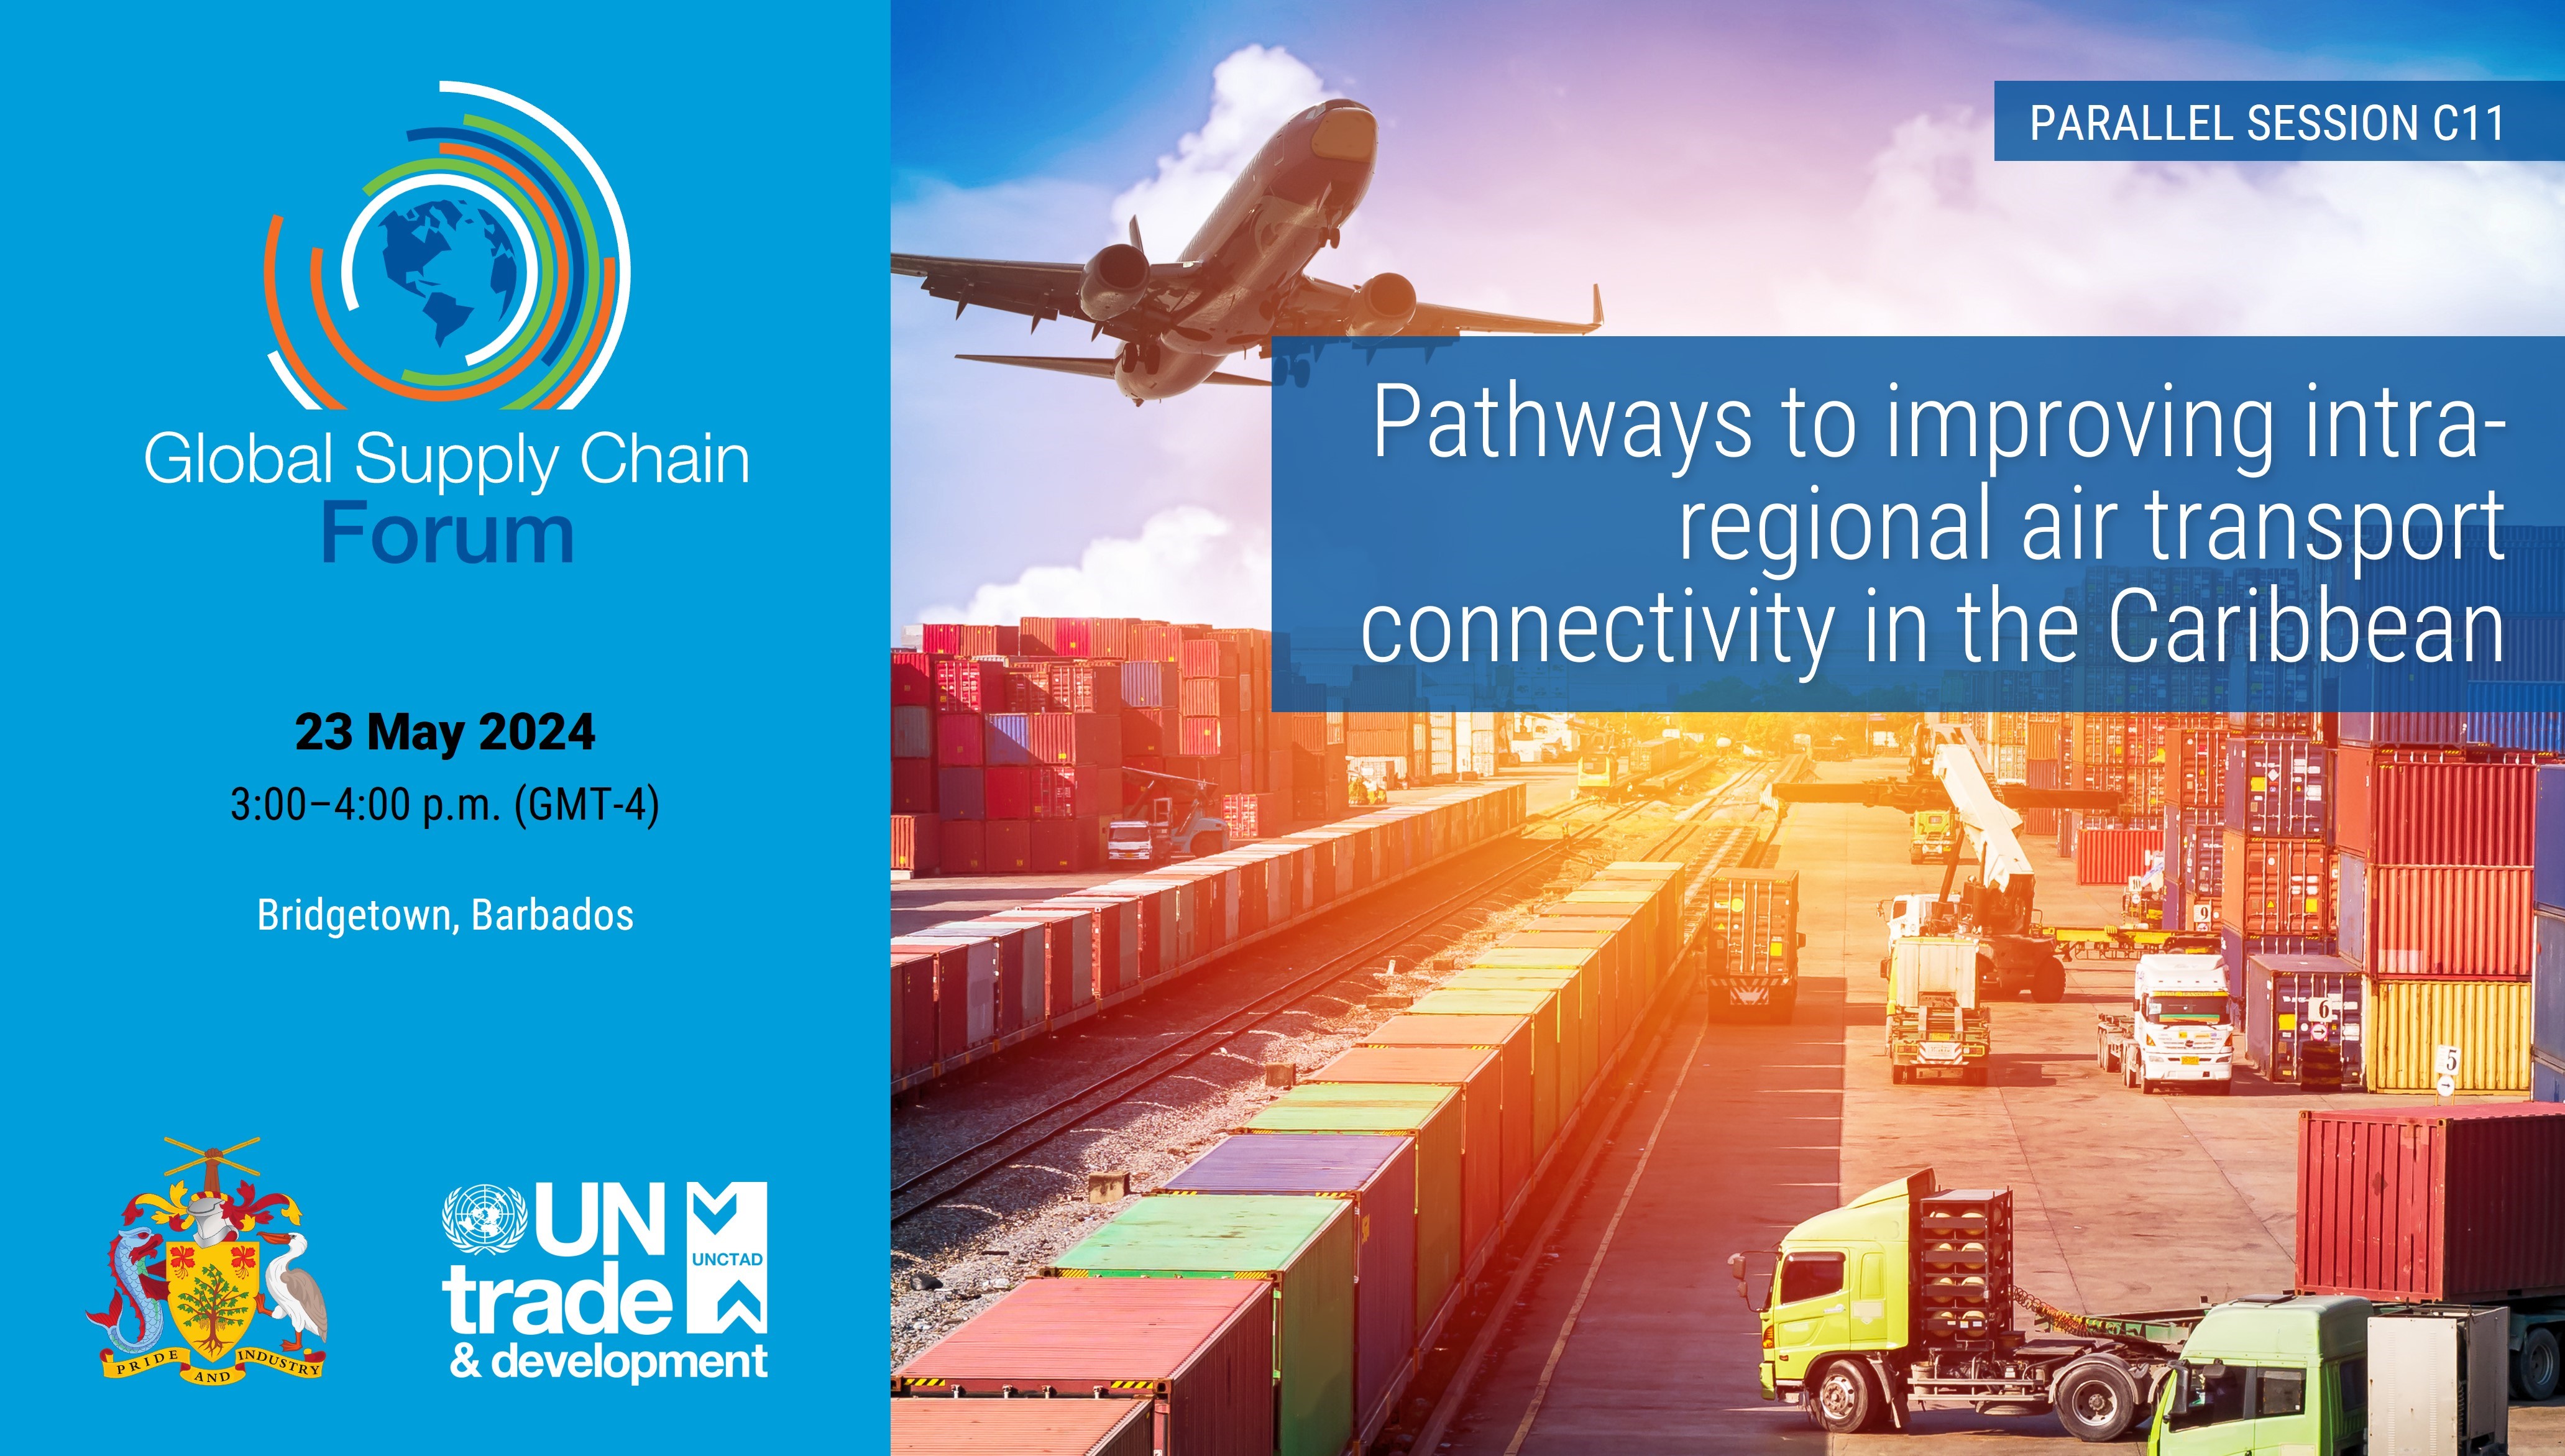 Pathways to improving intra-regional air transport connectivity in the Caribbean - industry perspective